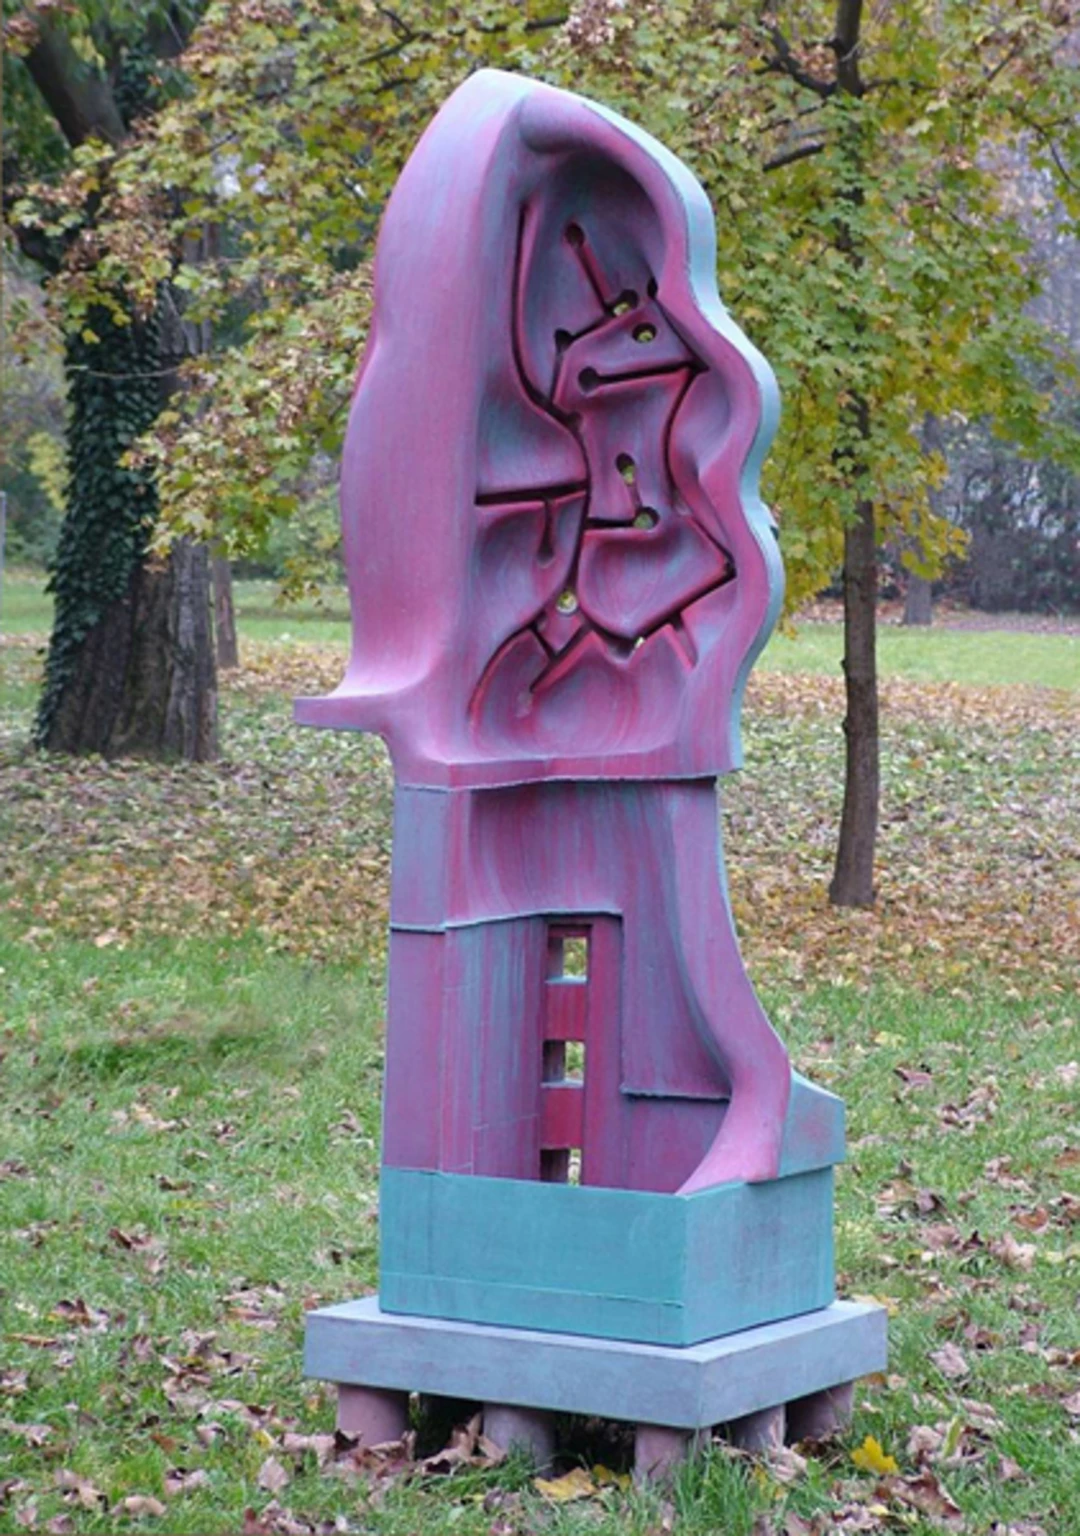 Shelter, 2005 - colored and painted concrete, 204 x 50 x 50 cm